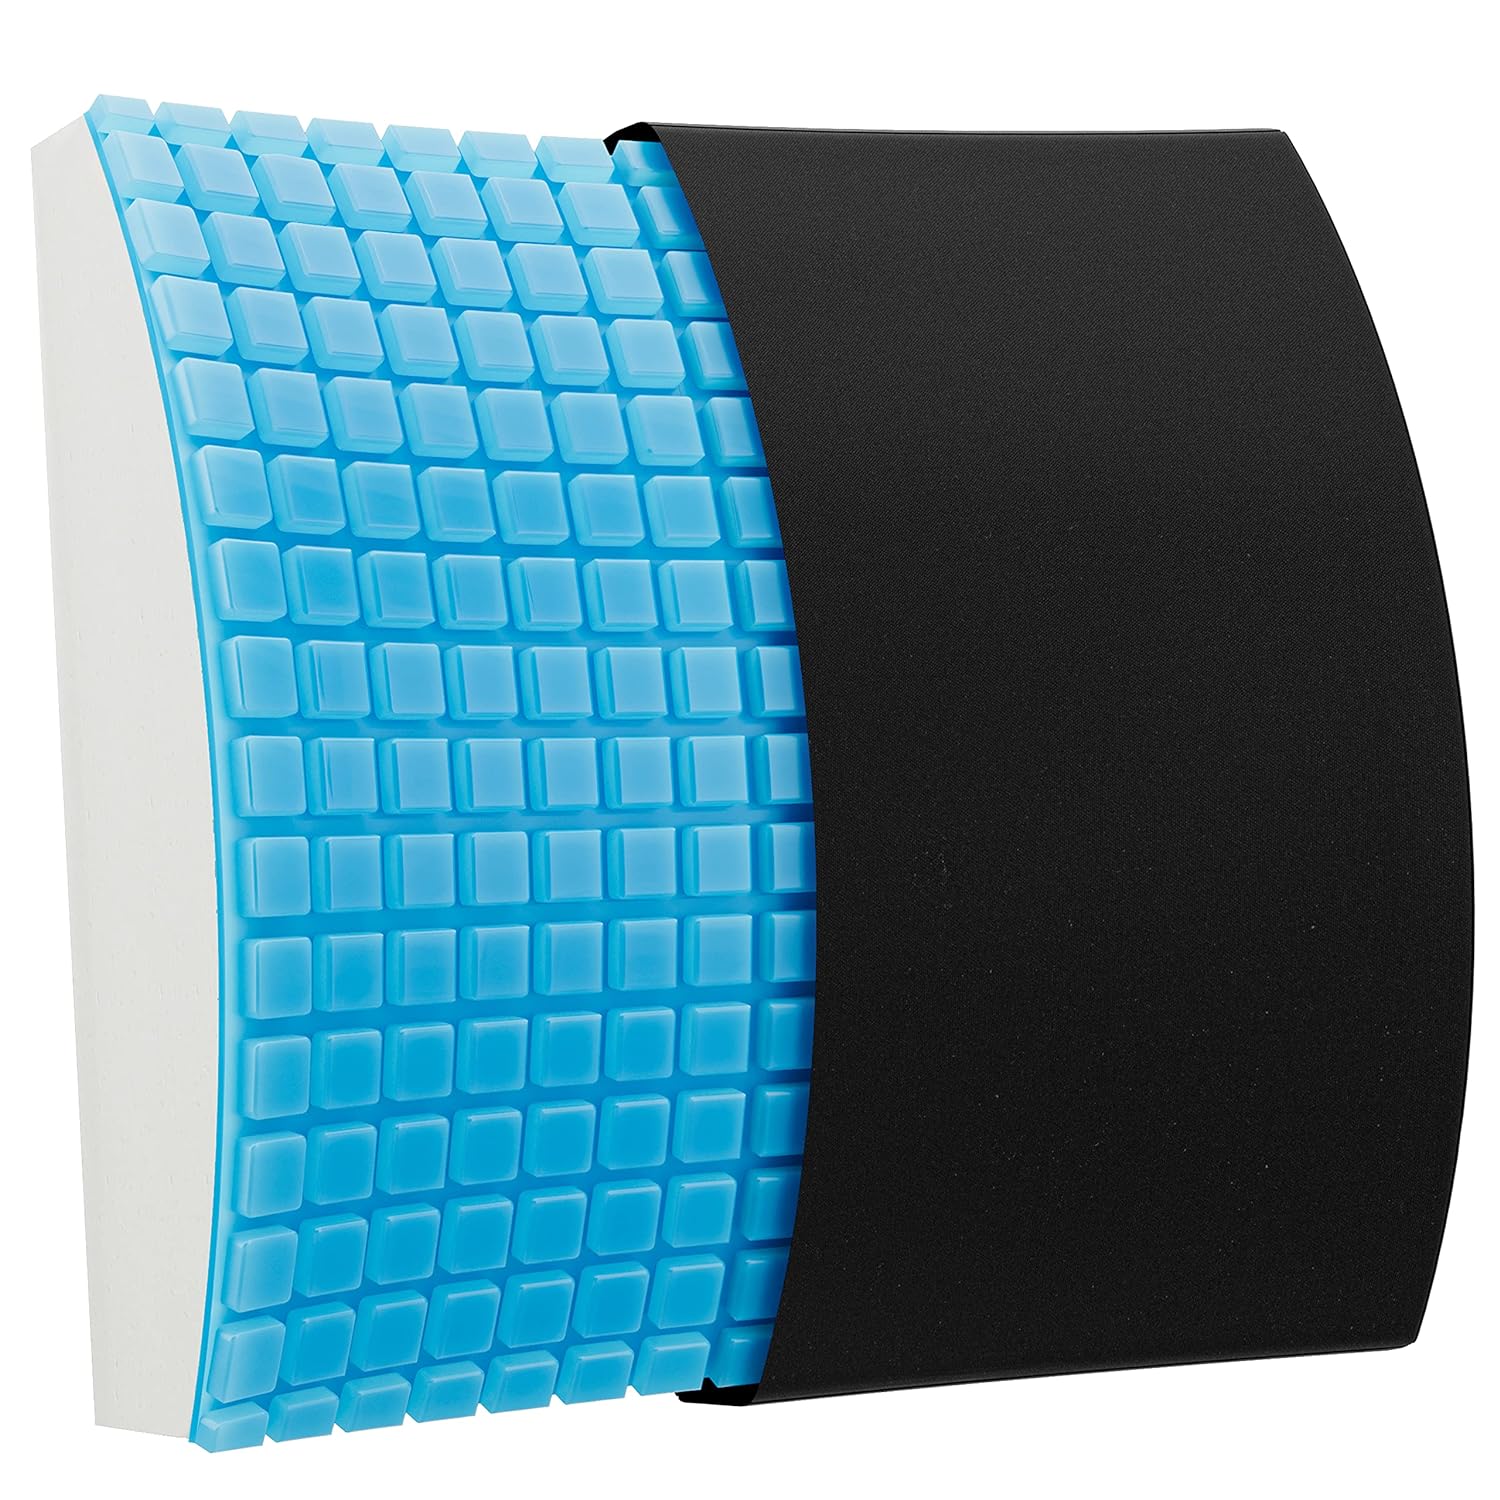 GELRIDE Gel Seat Cushion - Prevents Pressure Sores, Sciatica and Tailbone  Pain - Grid Design, Cool, Soft & Large - for Office Chair, Wheelchair -  - Bluee